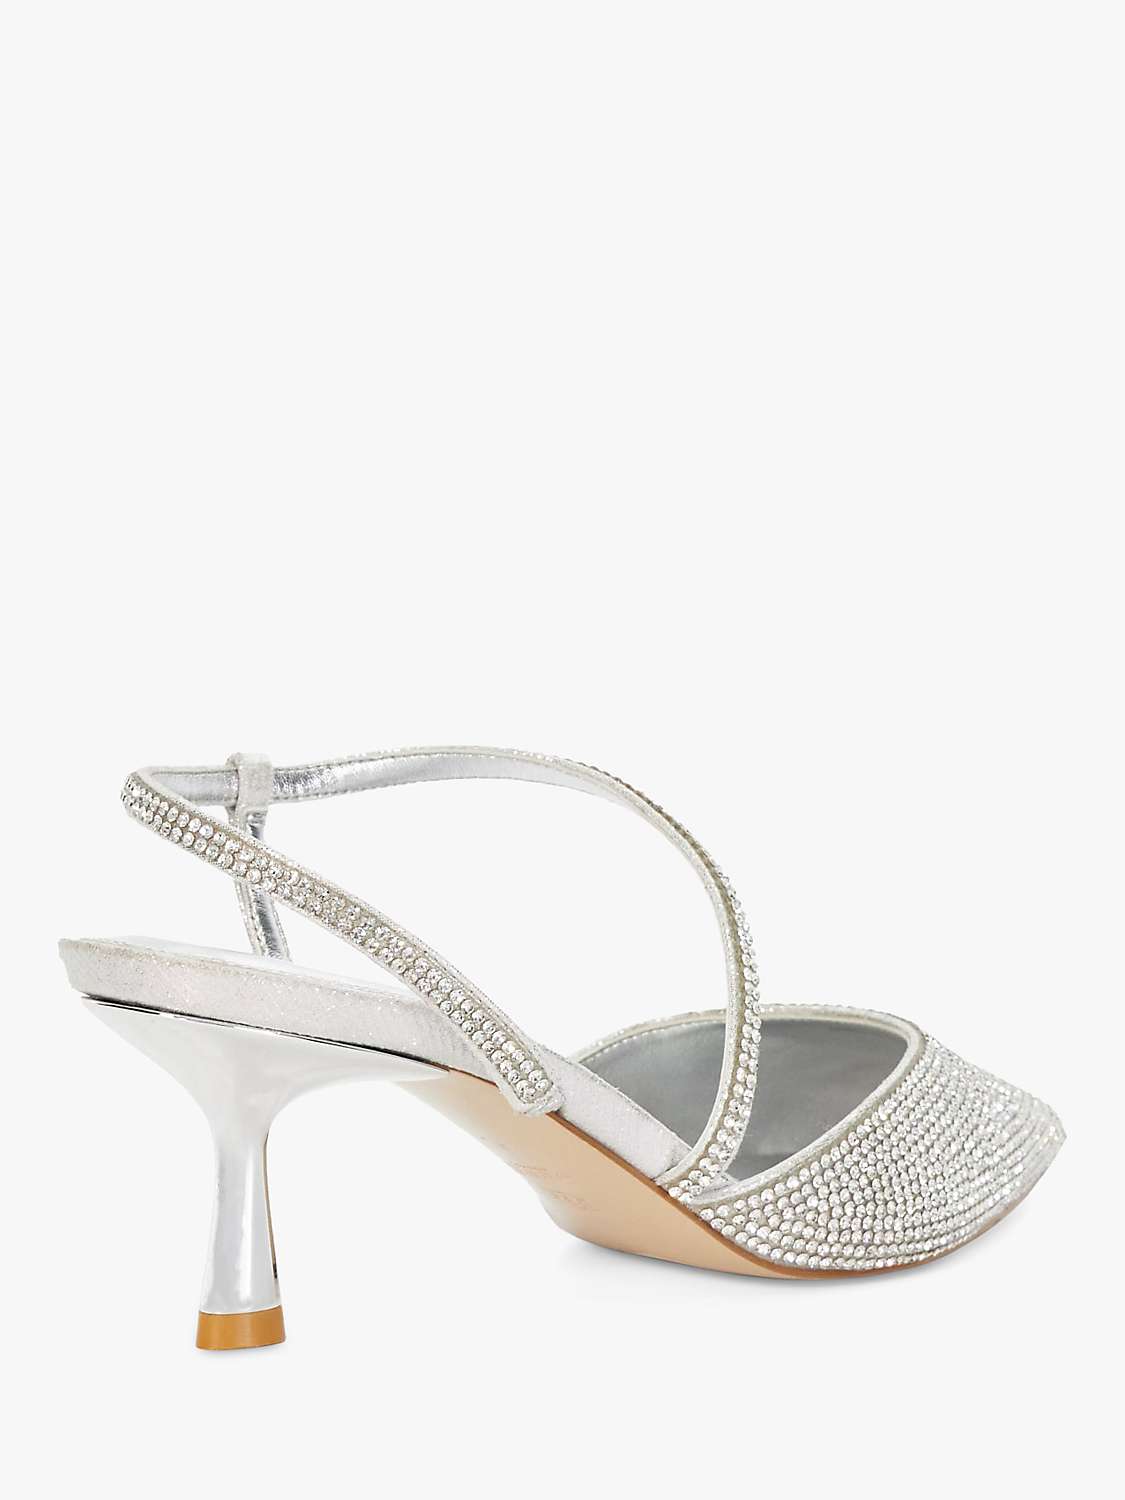 Buy Dune Competitive Crystal Pointed Toe Slingback Court Shoes, Silver Online at johnlewis.com